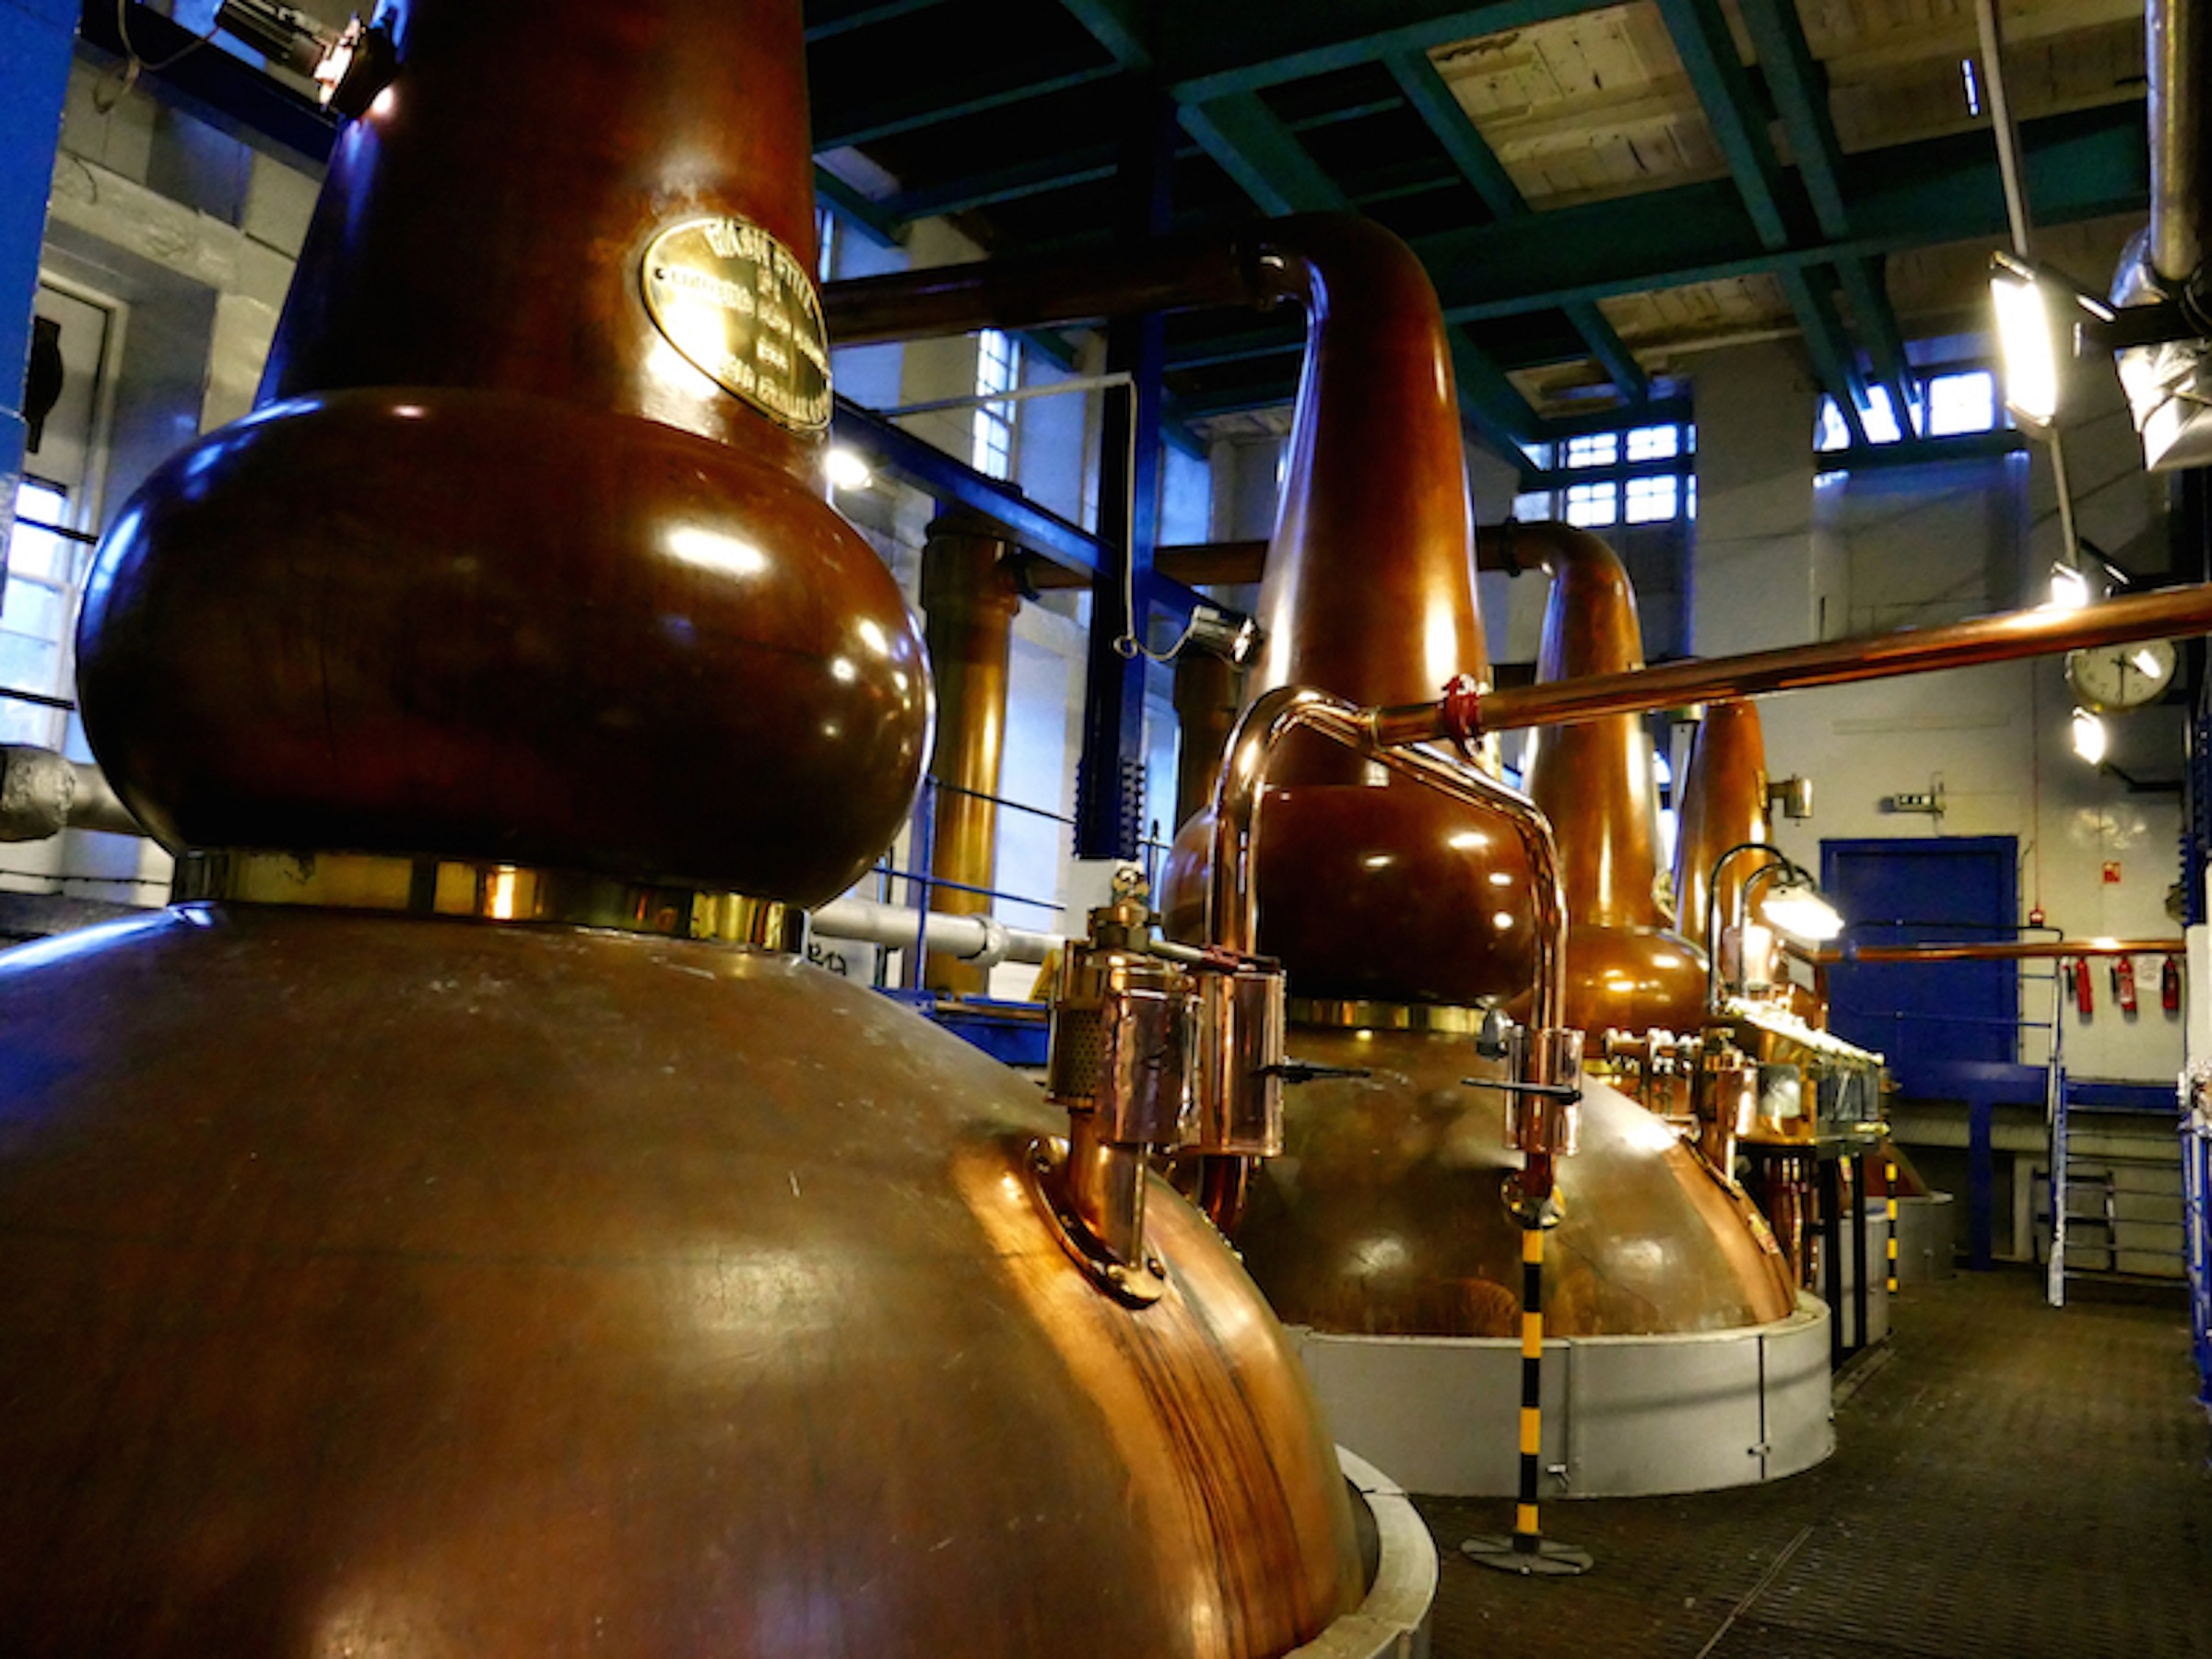 A close up of the copper tanks at a distillery